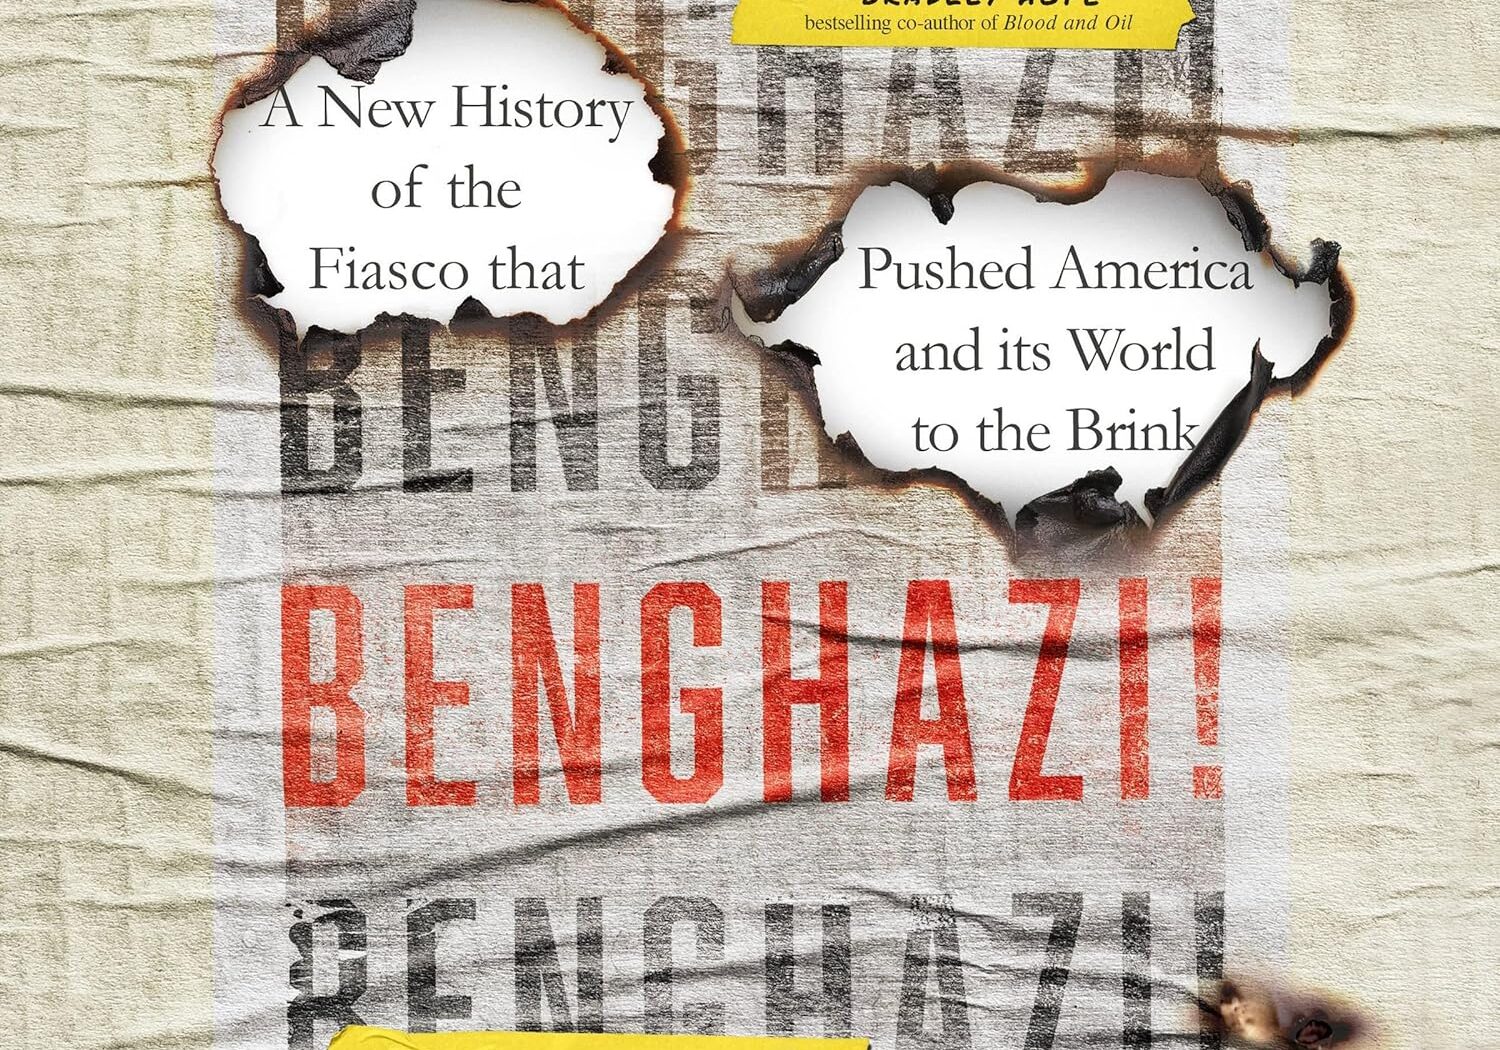 Benghazi! A New History of the Fiasco That Pushed America and Its World to the Brink